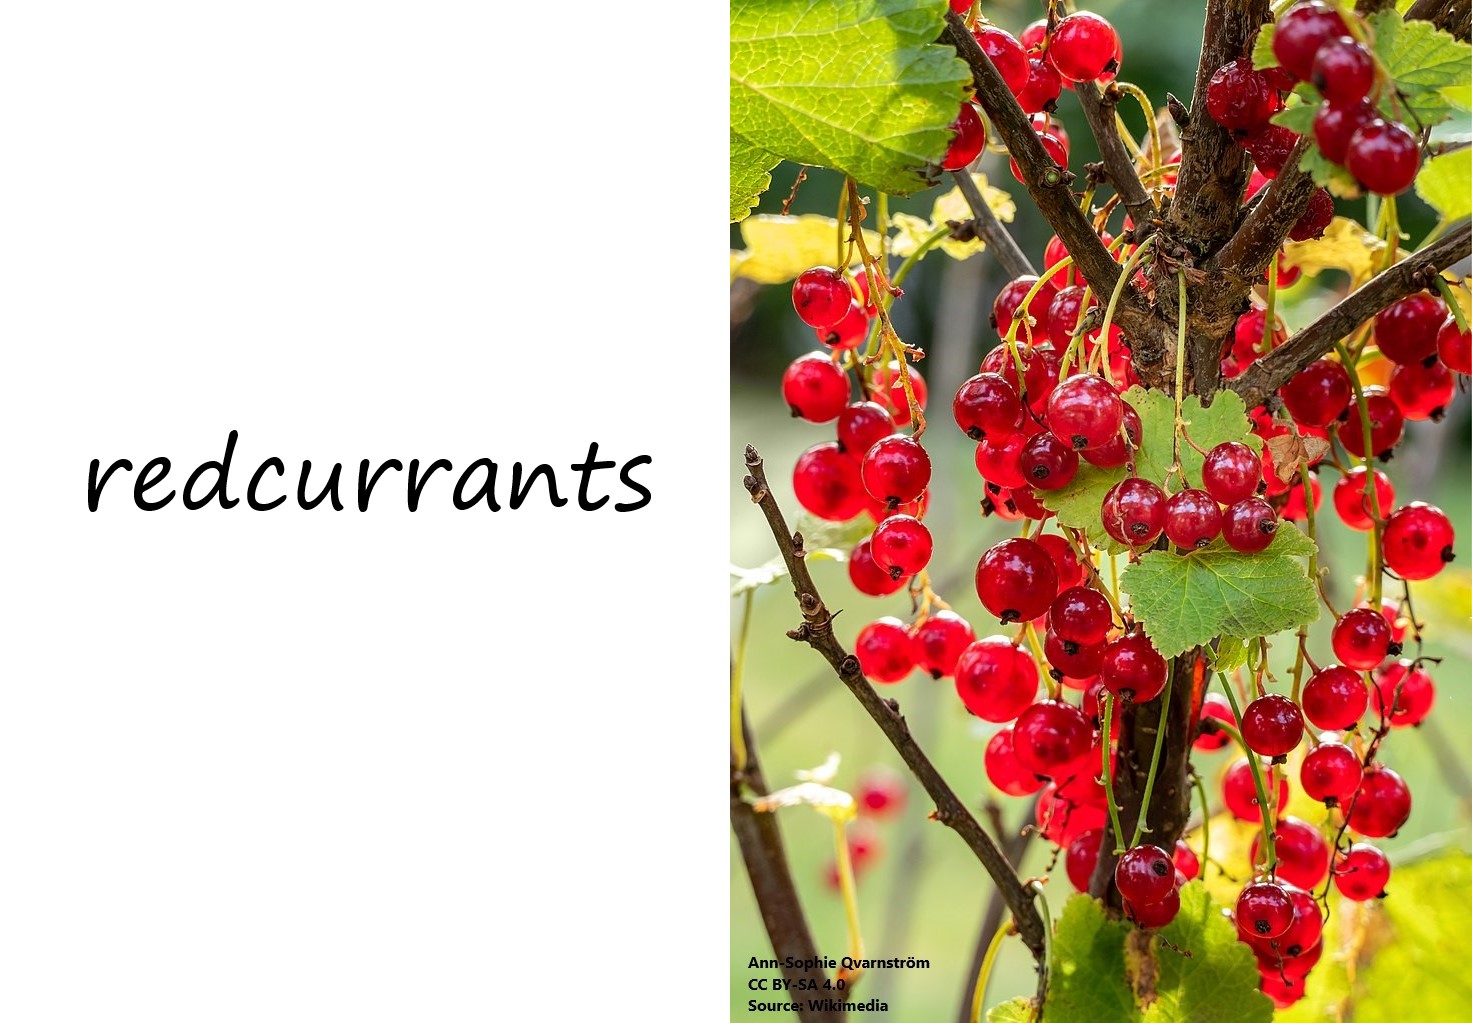 Redcurrants photo with label